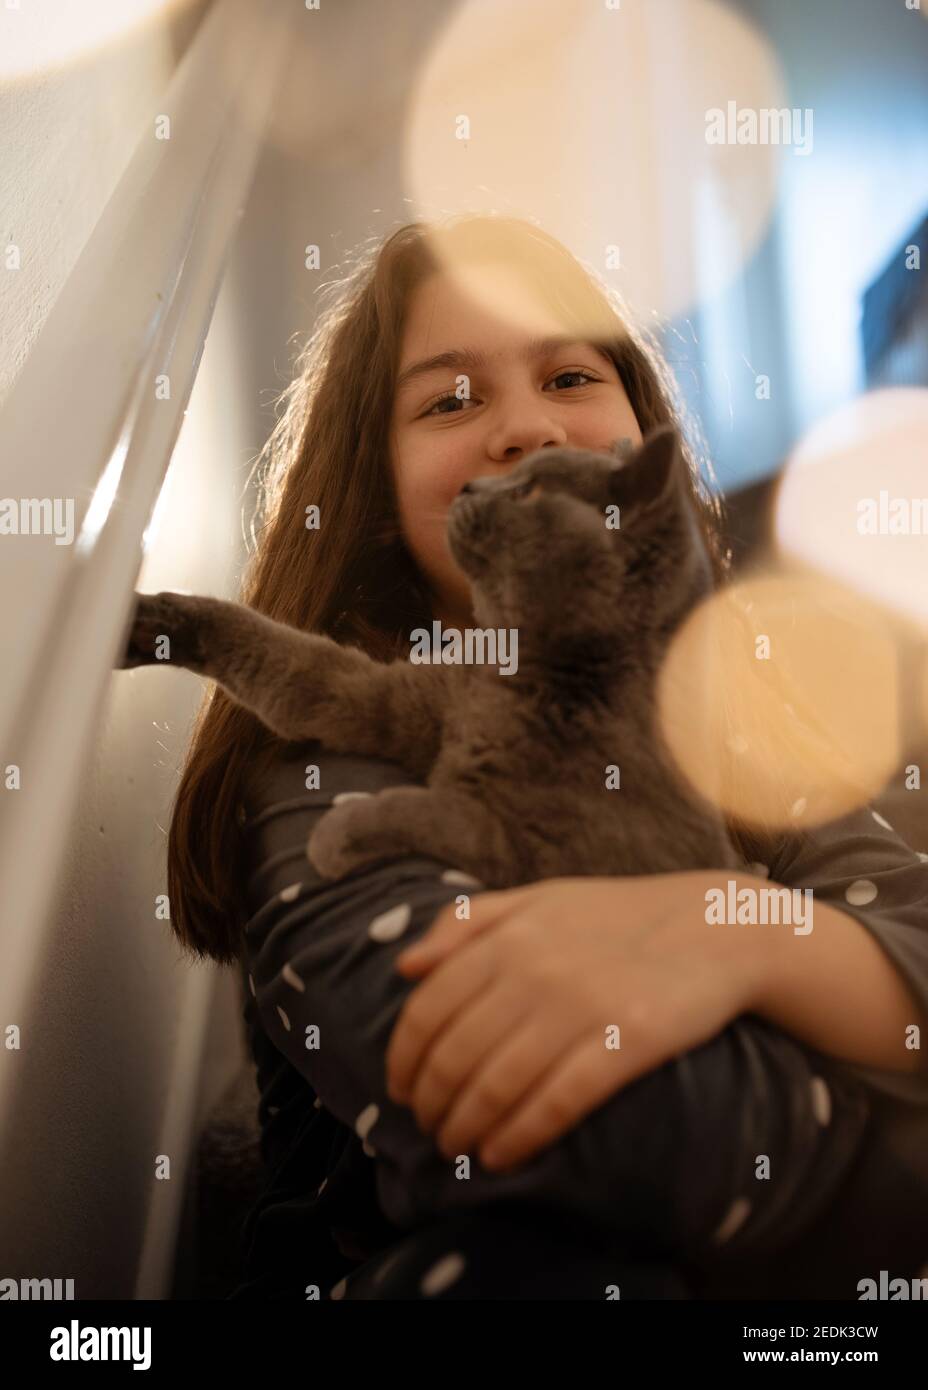 Girls in grey pyjamas hugging a blue cat sitting on a on the stairs Stock Photo